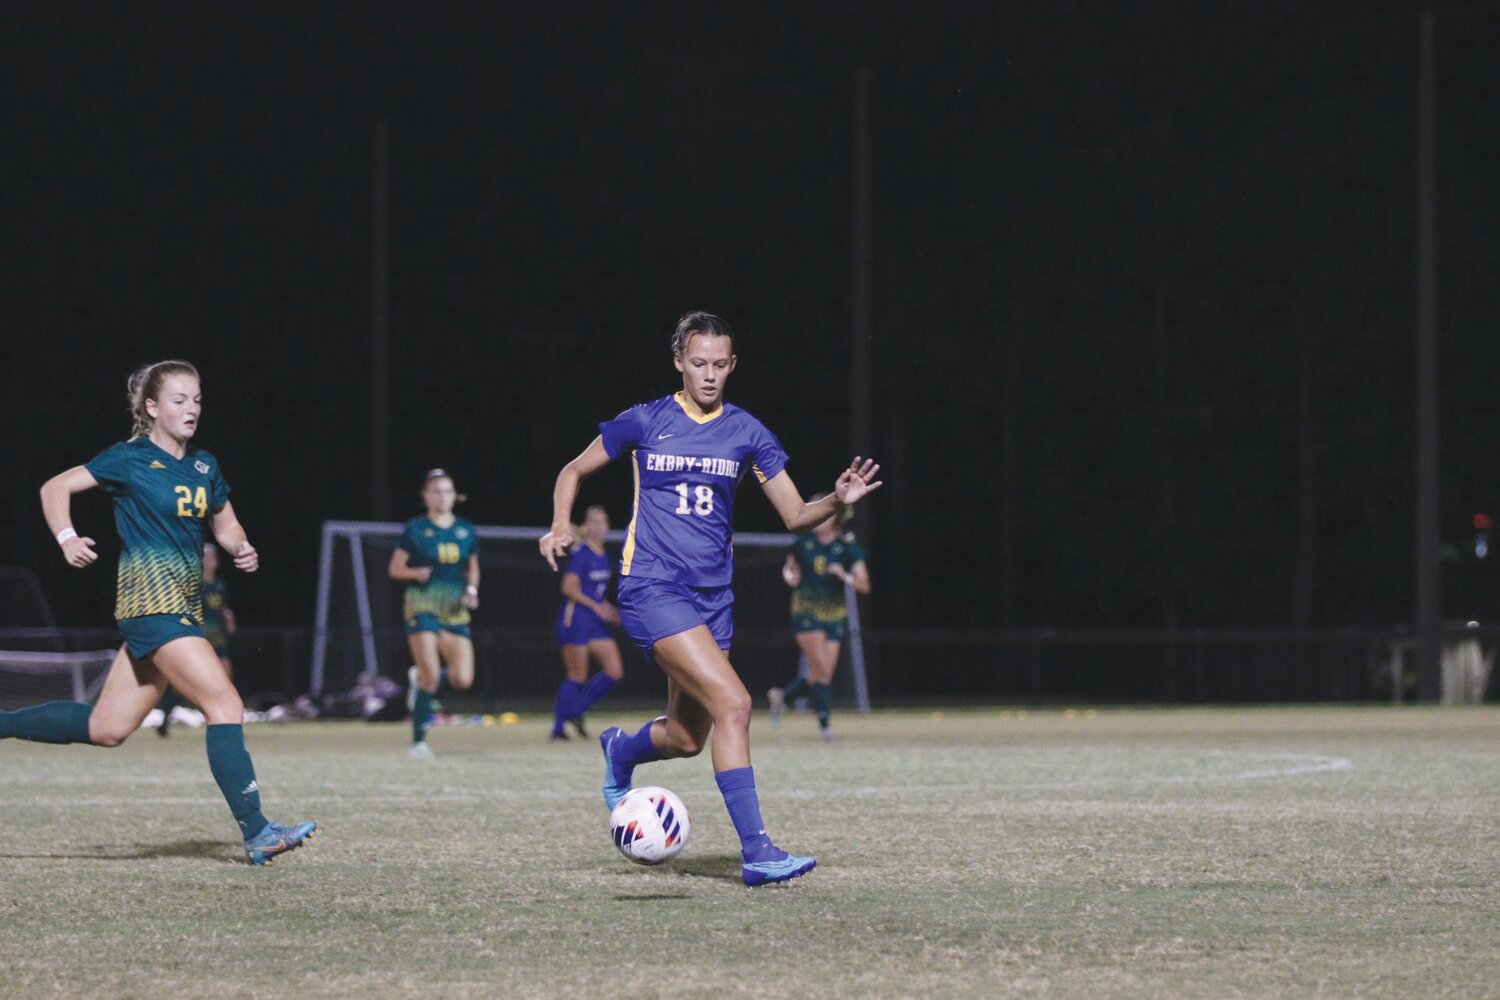 Former St. Johns Country Day School soccer star Lauryn Mateo was named Sunshine State Conference championship tournament Most Outstanding Player as a freshman forward for Embry Riddle Aeronautical University as the team heads into the NCAA Div II championship tournament.